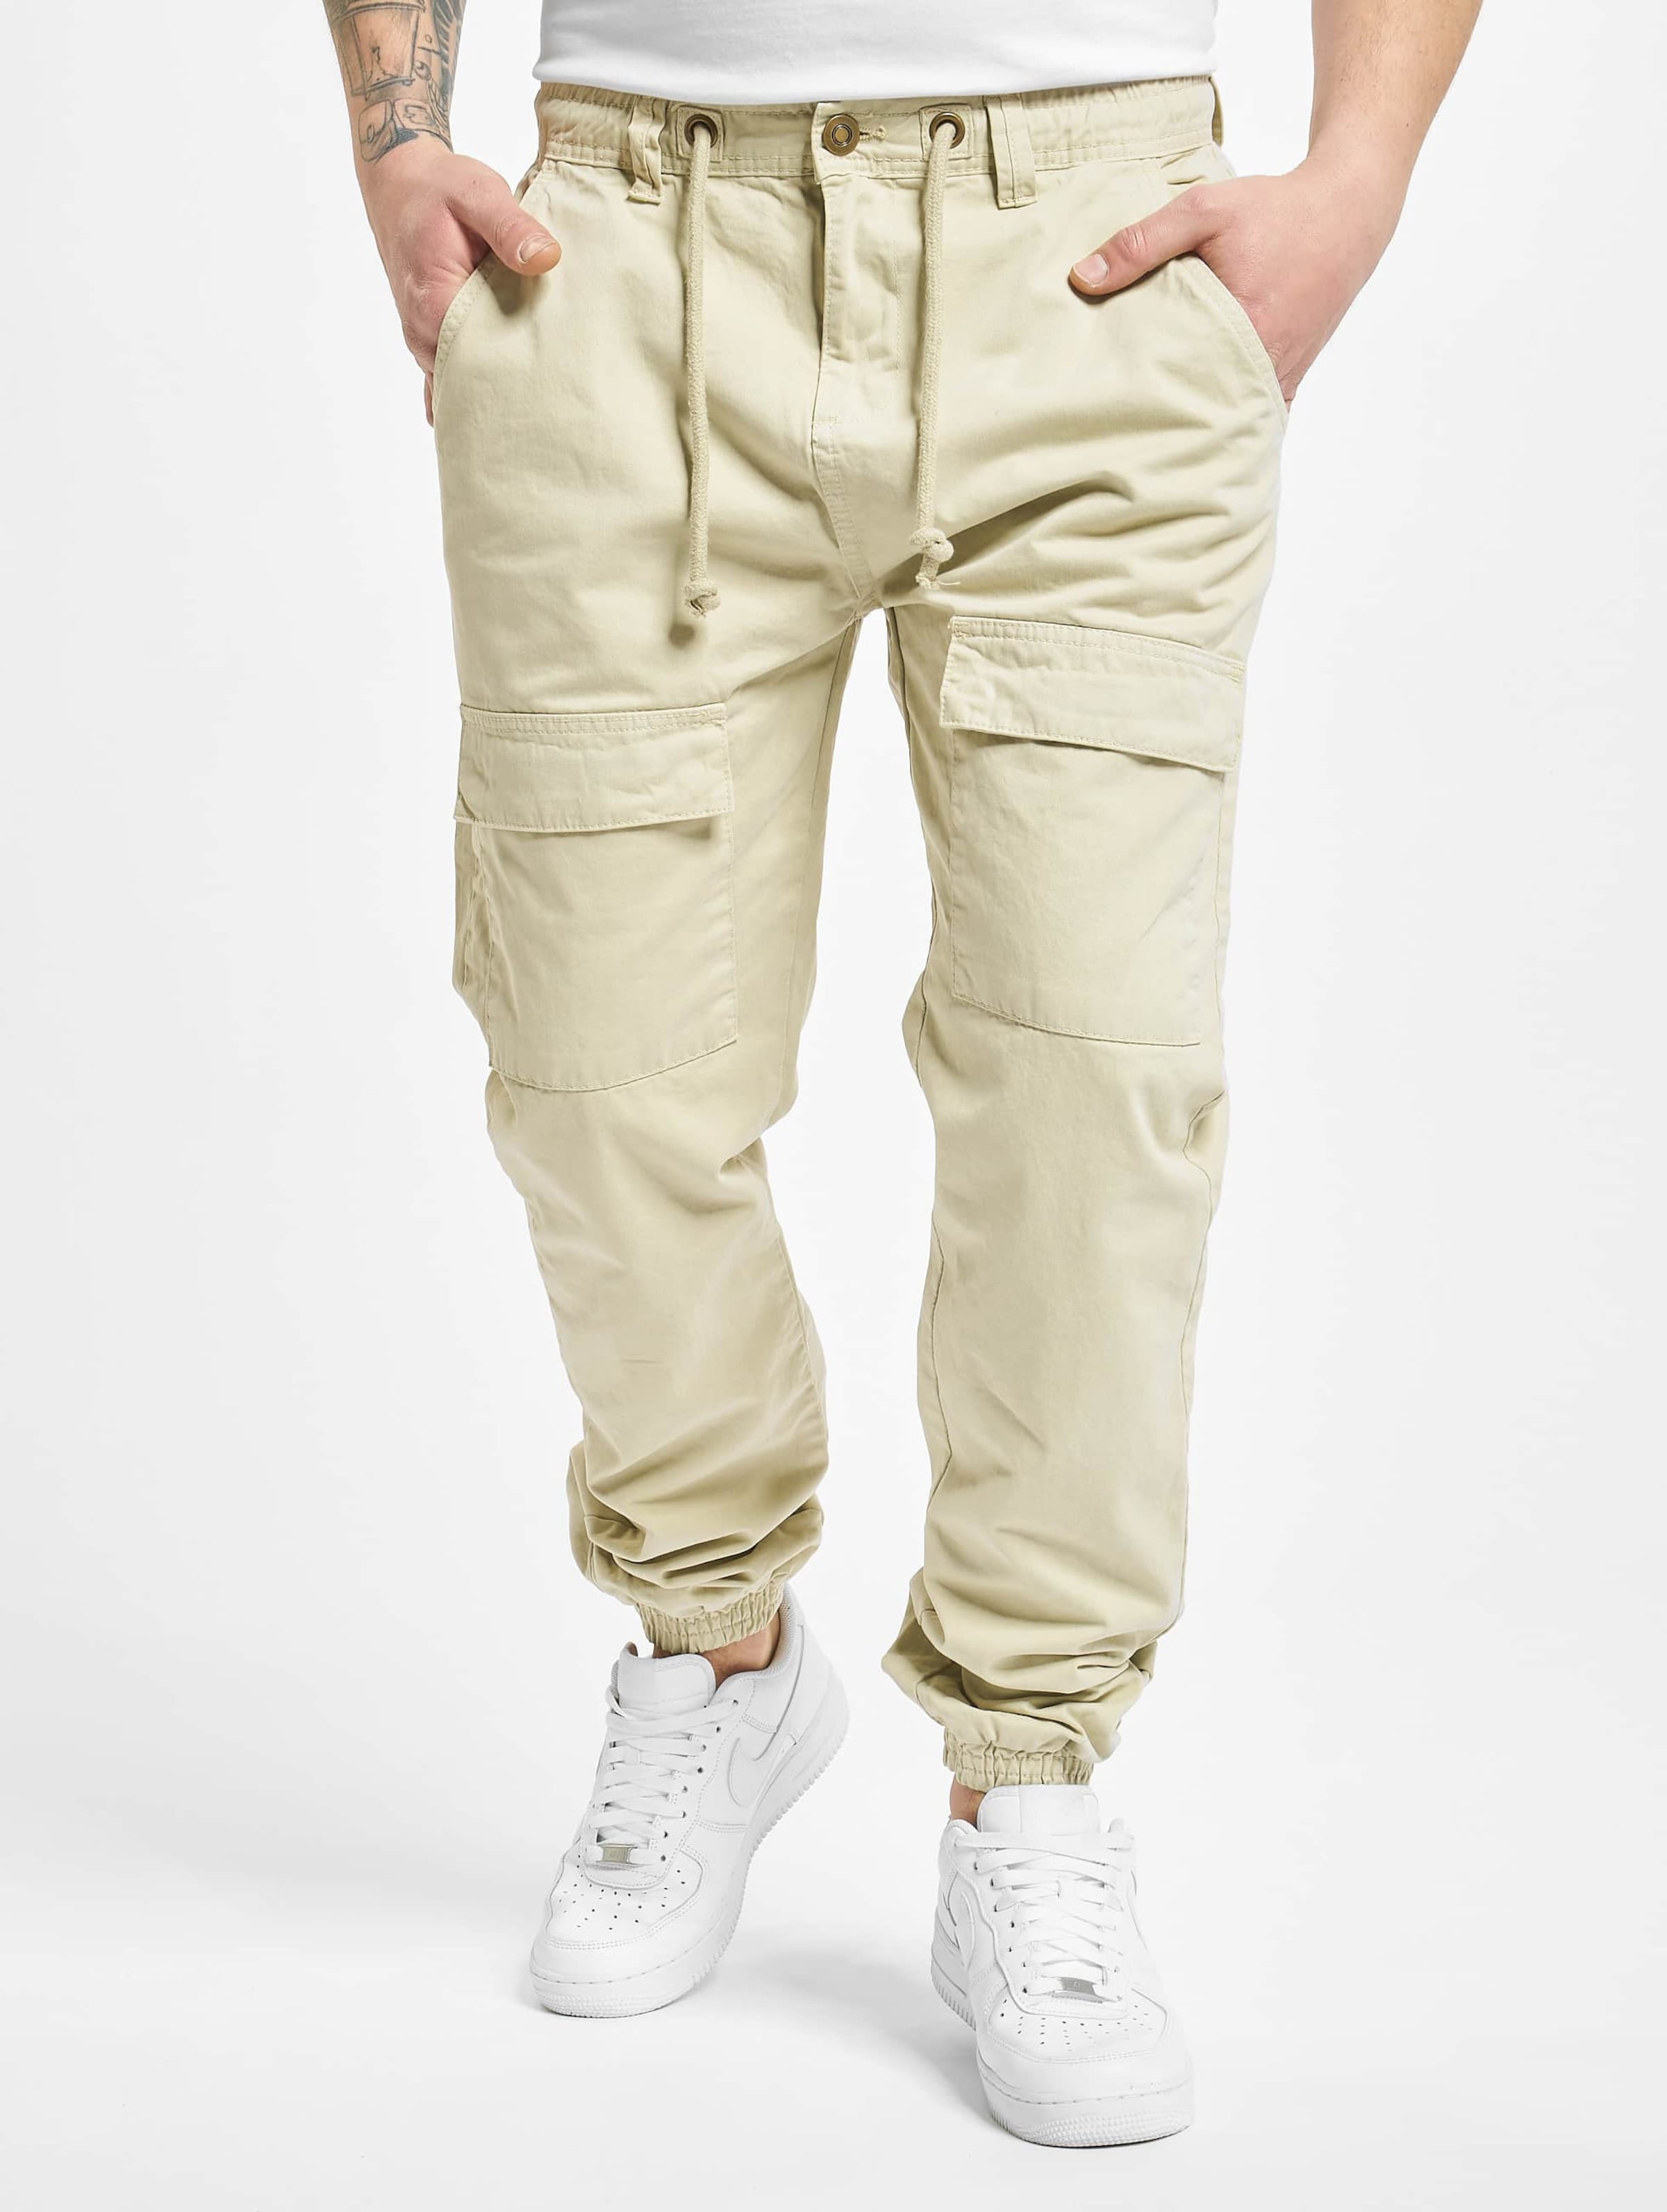 Mens Cargo Pants 100% Cotton Work Trousers Tactical Combat Outdoor Pant US  New A | eBay